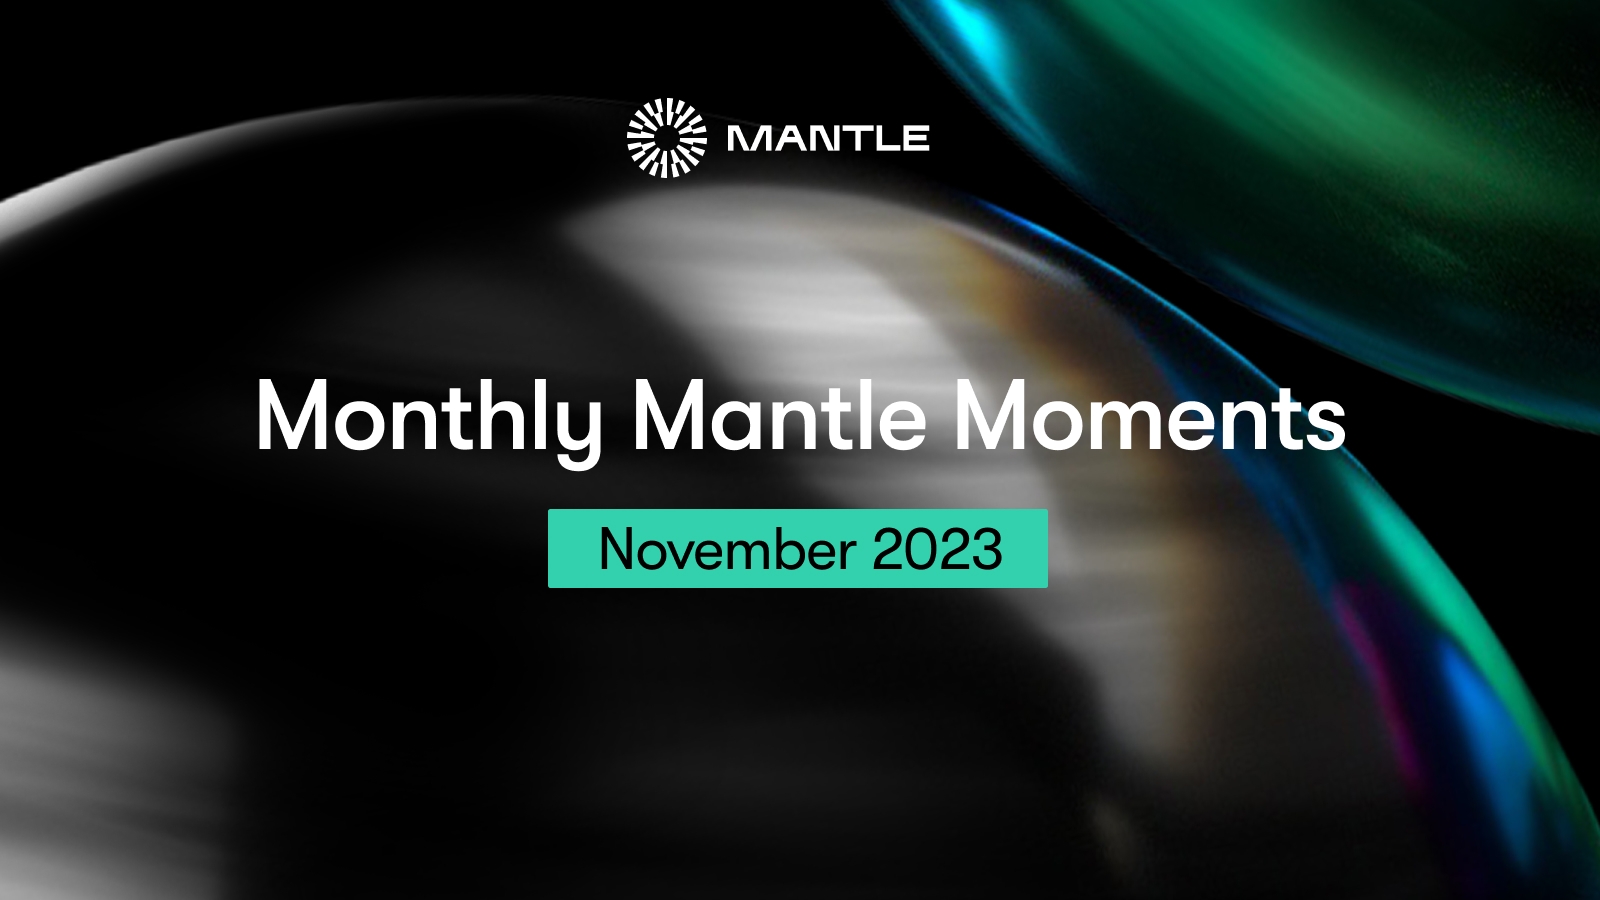 Mantle  Mass Adoption of Decentralized and Token-Governed